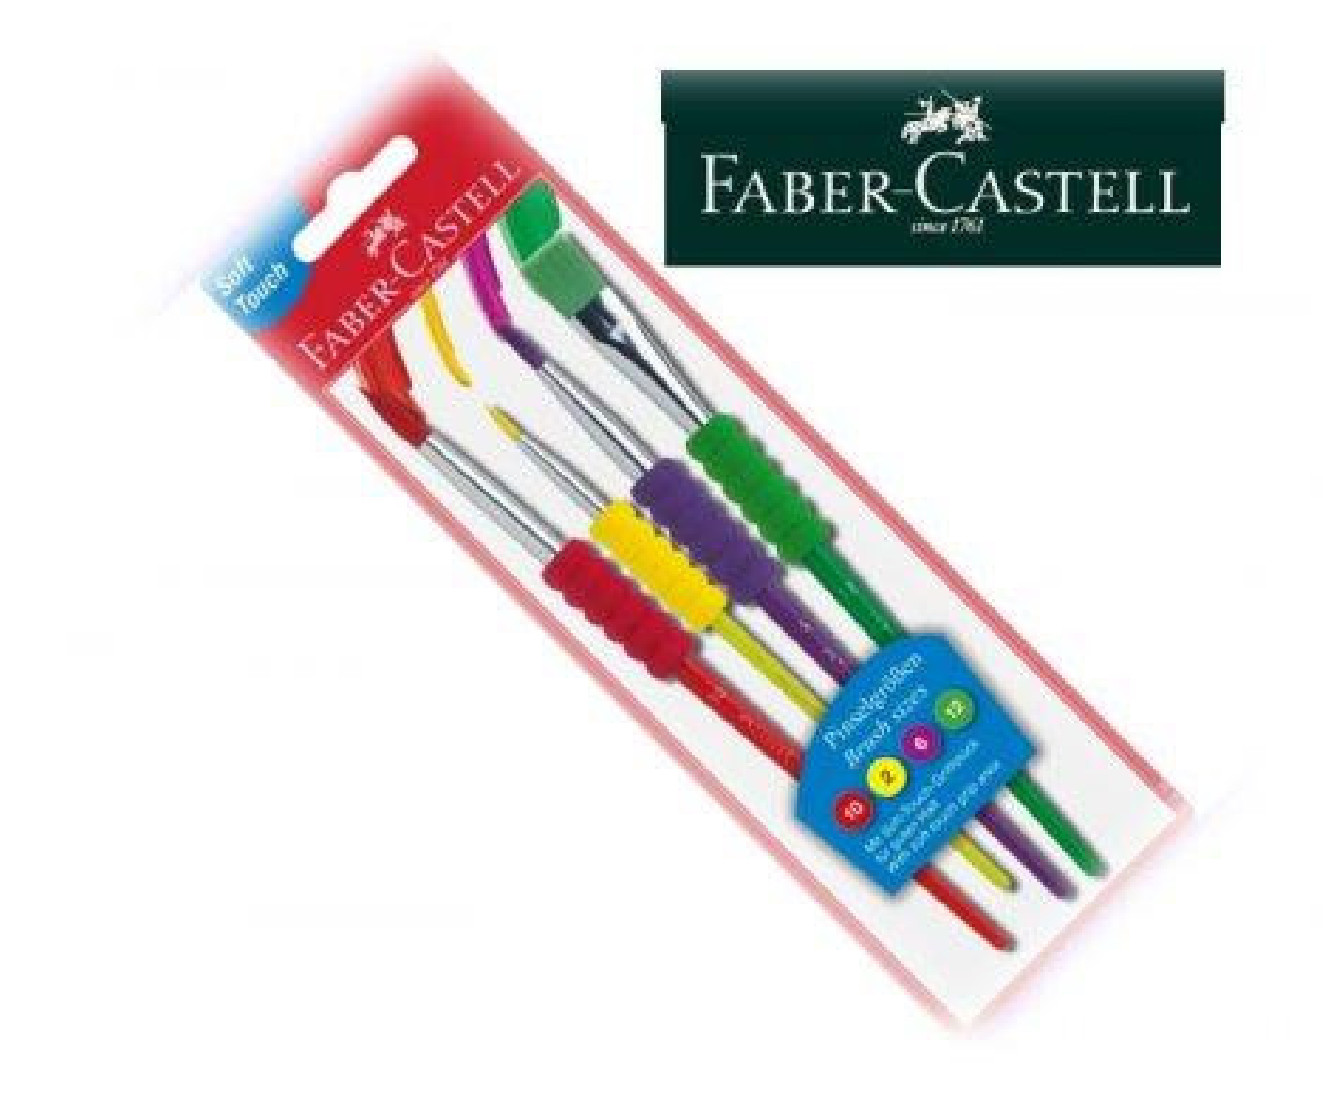 Faber Castell Brush with soft touch grip area, 4 sizes on blister card